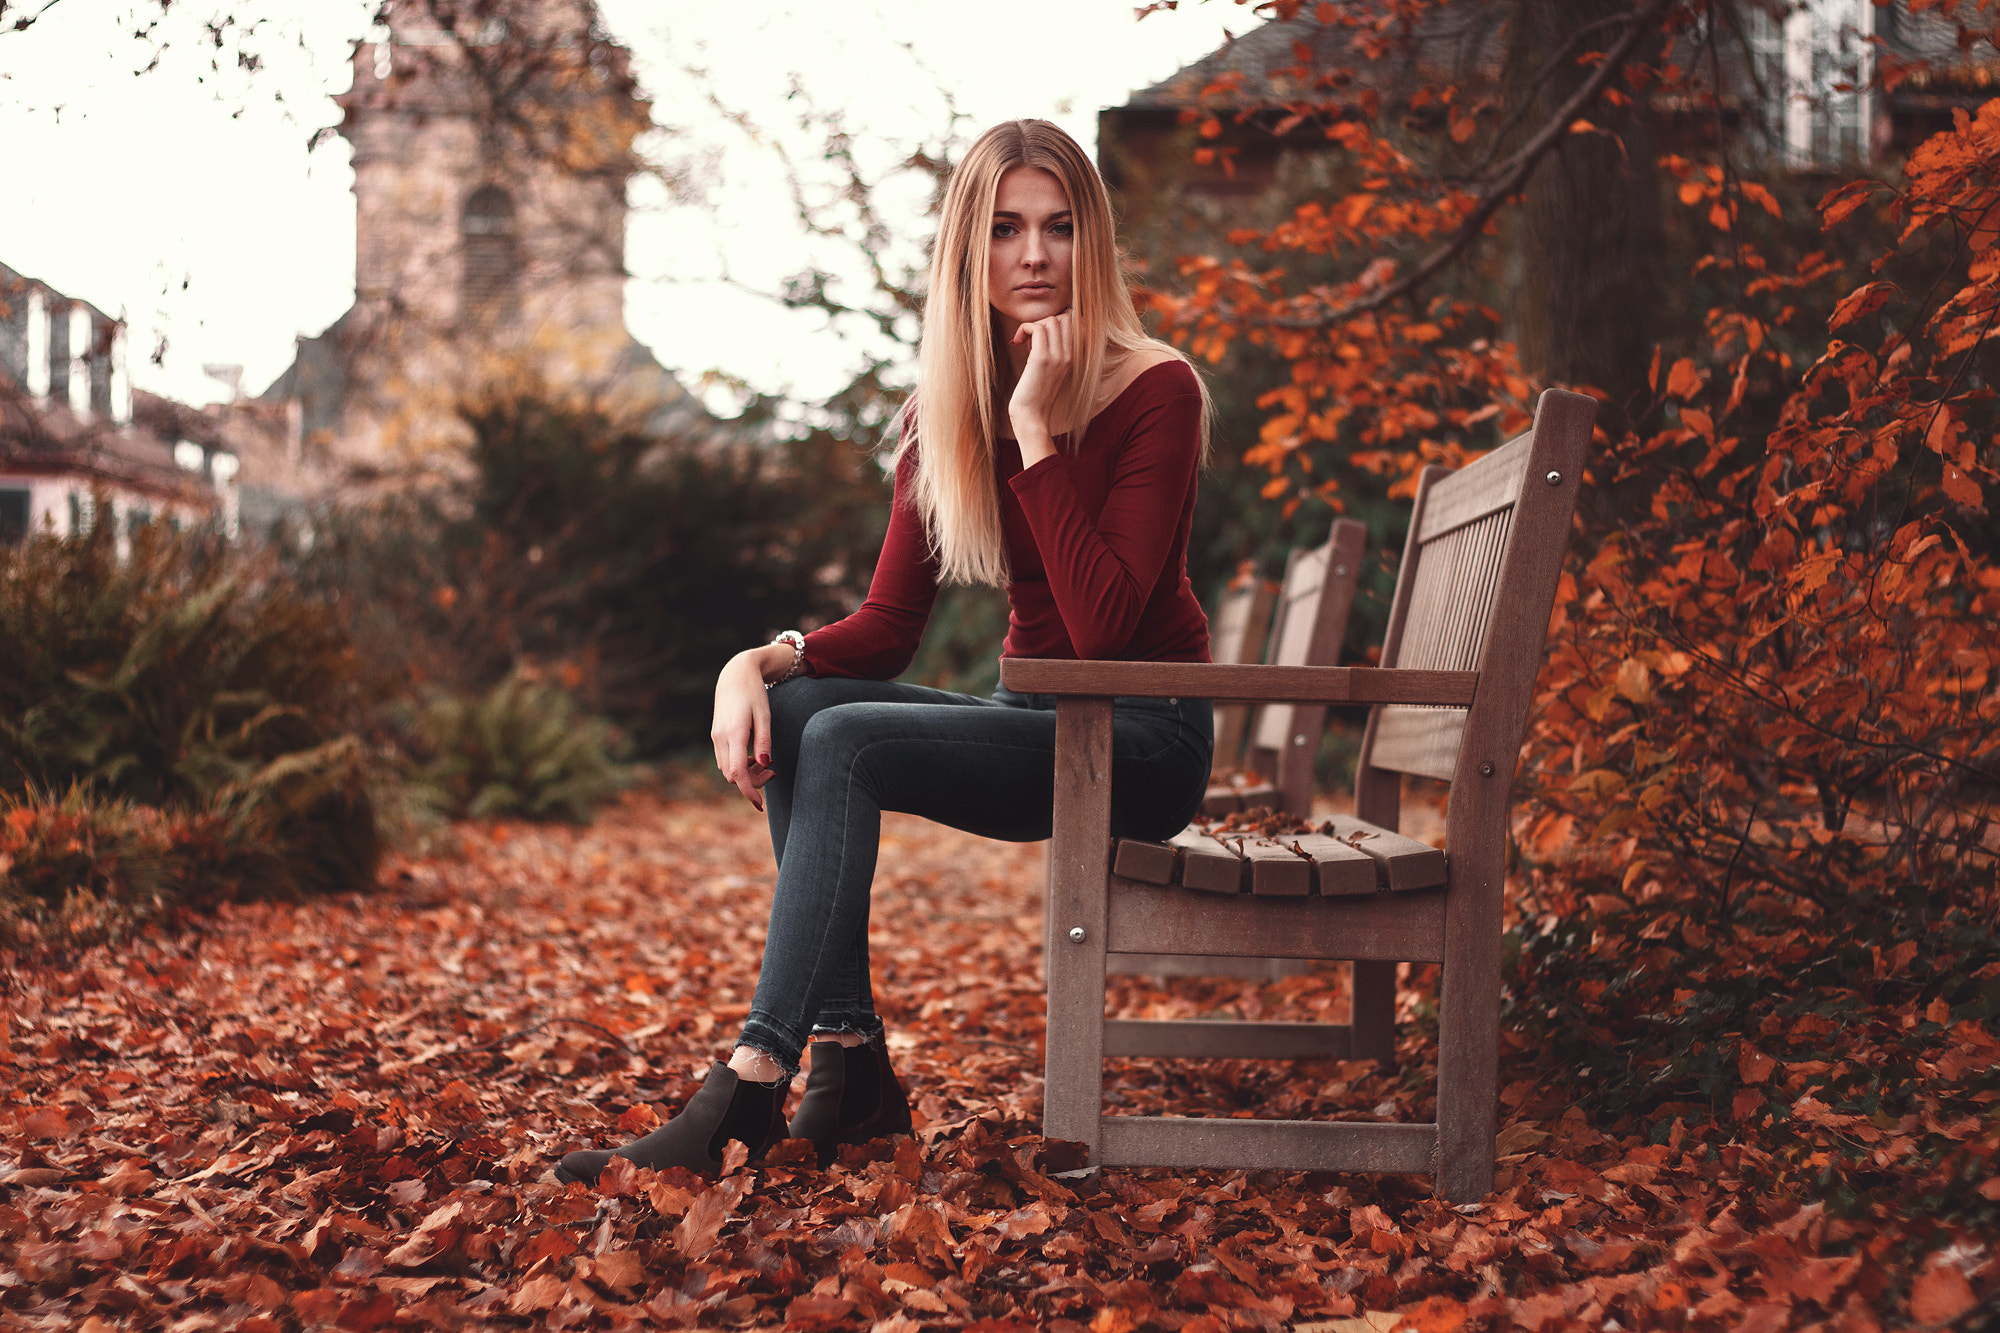 Women Blonde Skinny Jeans Bench Red Leaves Sitting Looking At Viewer Red Clothing Straight Hair Long 2000x1333